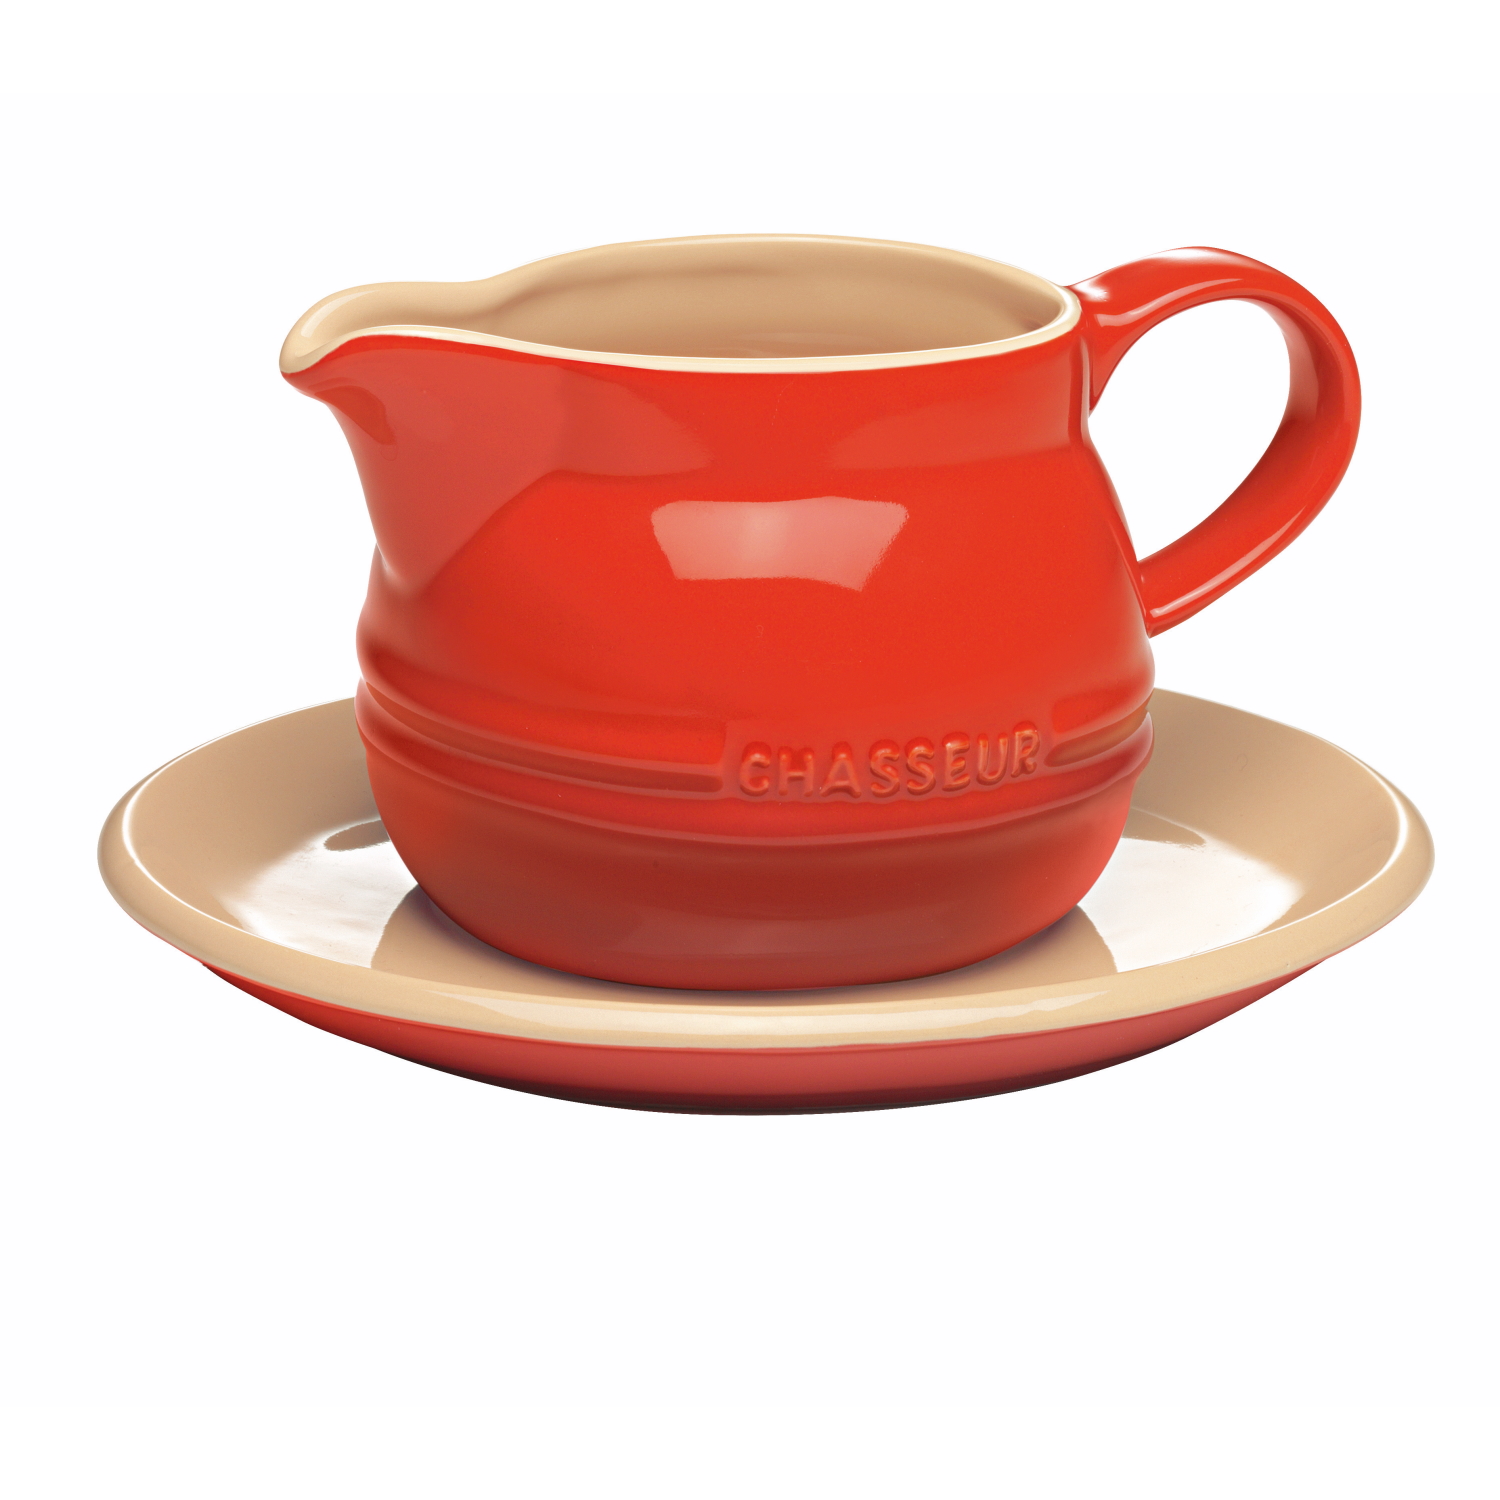 Chasseur La Cuissn Gravy Boat+Saucer Red